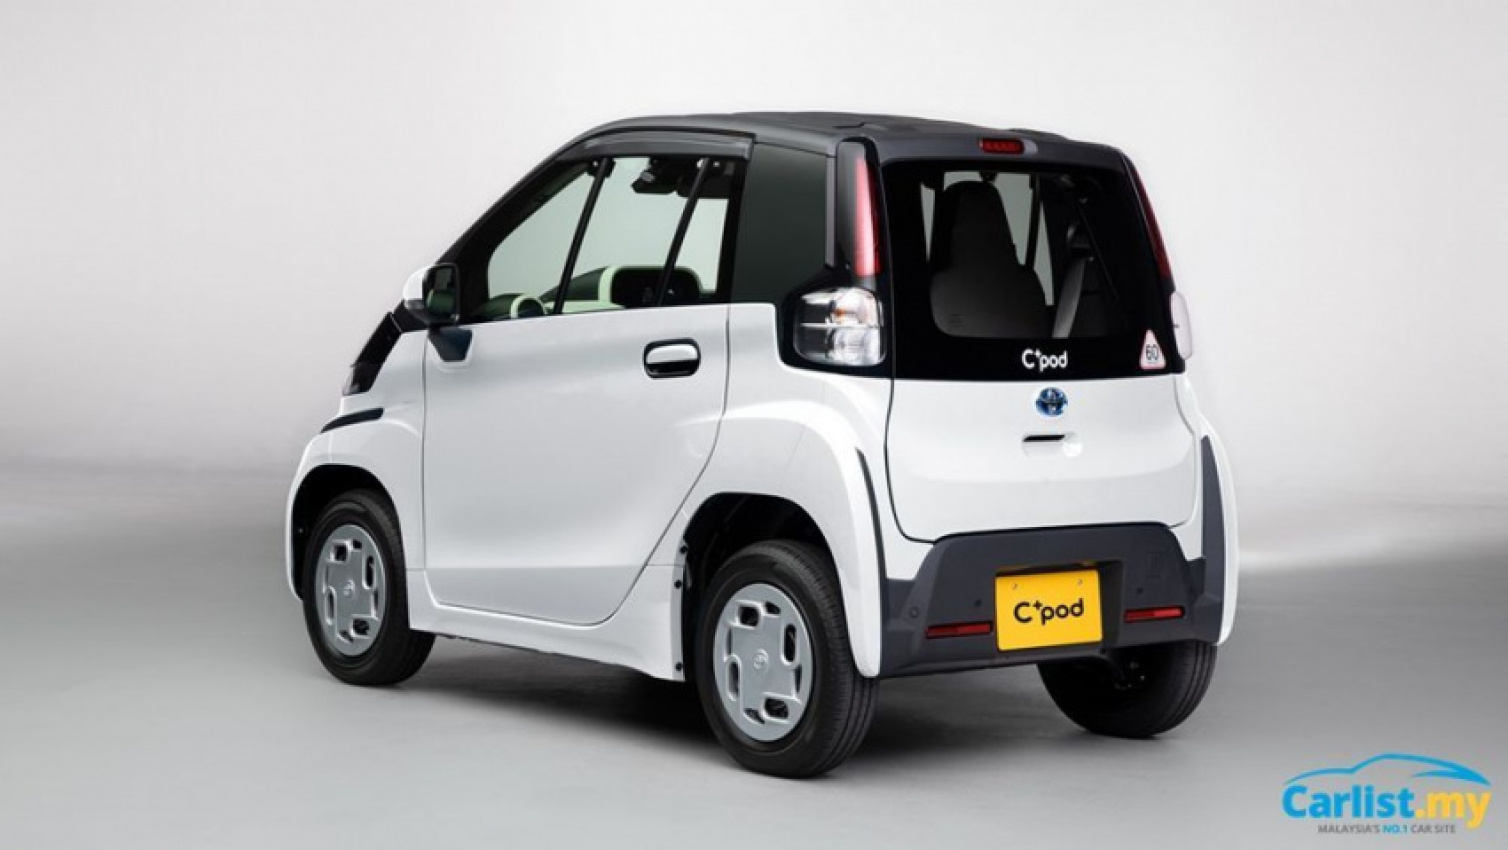 autos, cars, electric vehicle, toyota, auto news, bev, c+pod, ev, ev car, toyota c+pod bev, toyota c+ pod unveiled: the aaa sized ev car we all want